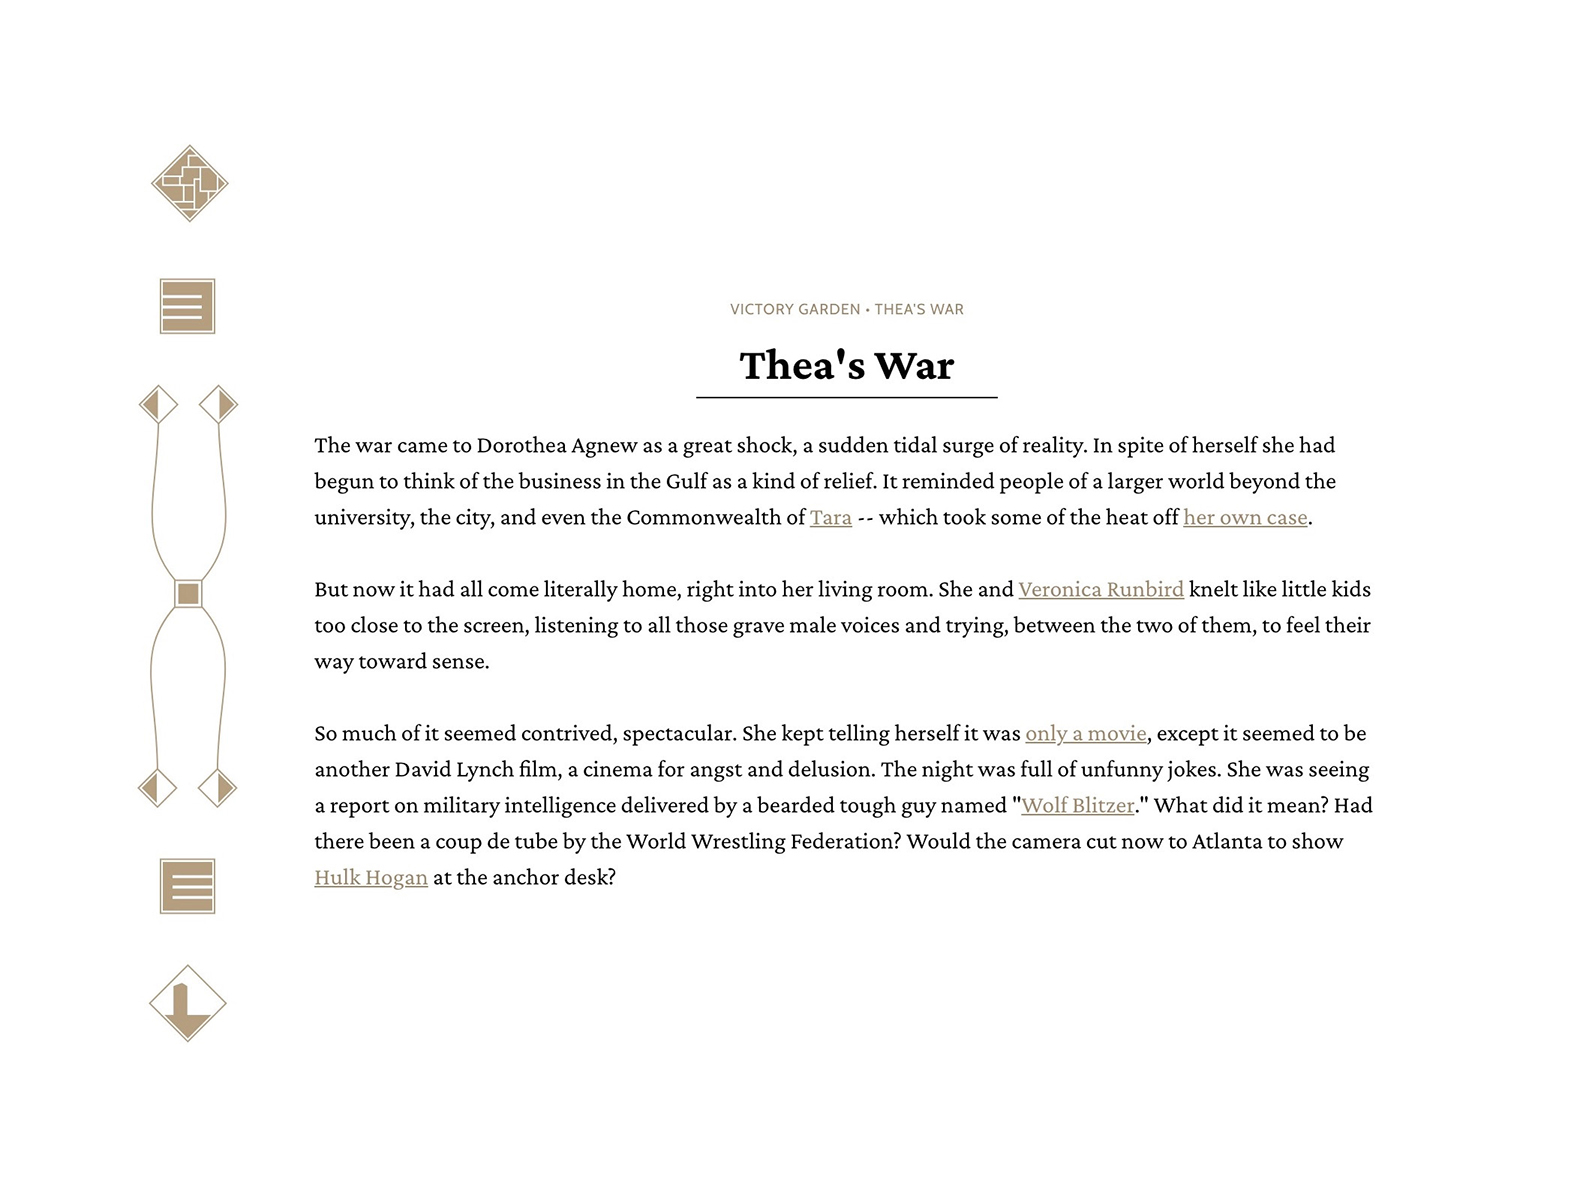 A screenshot of Victory Garden 2022 showing the page Thea's War